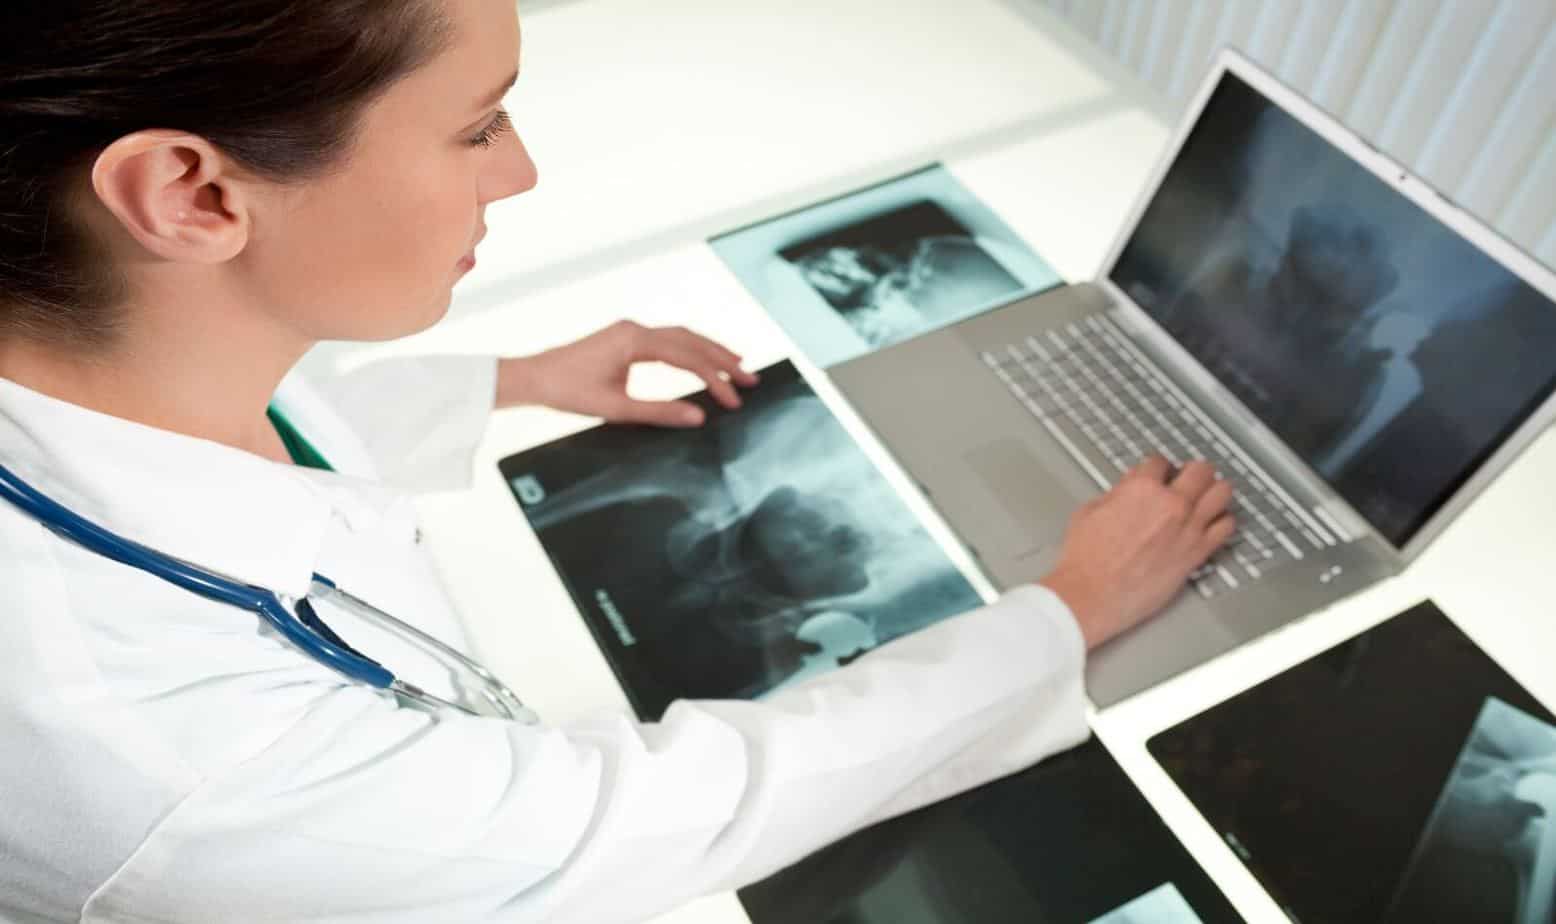 female medical doctor looking at x-rays of hip replacement using a laptop